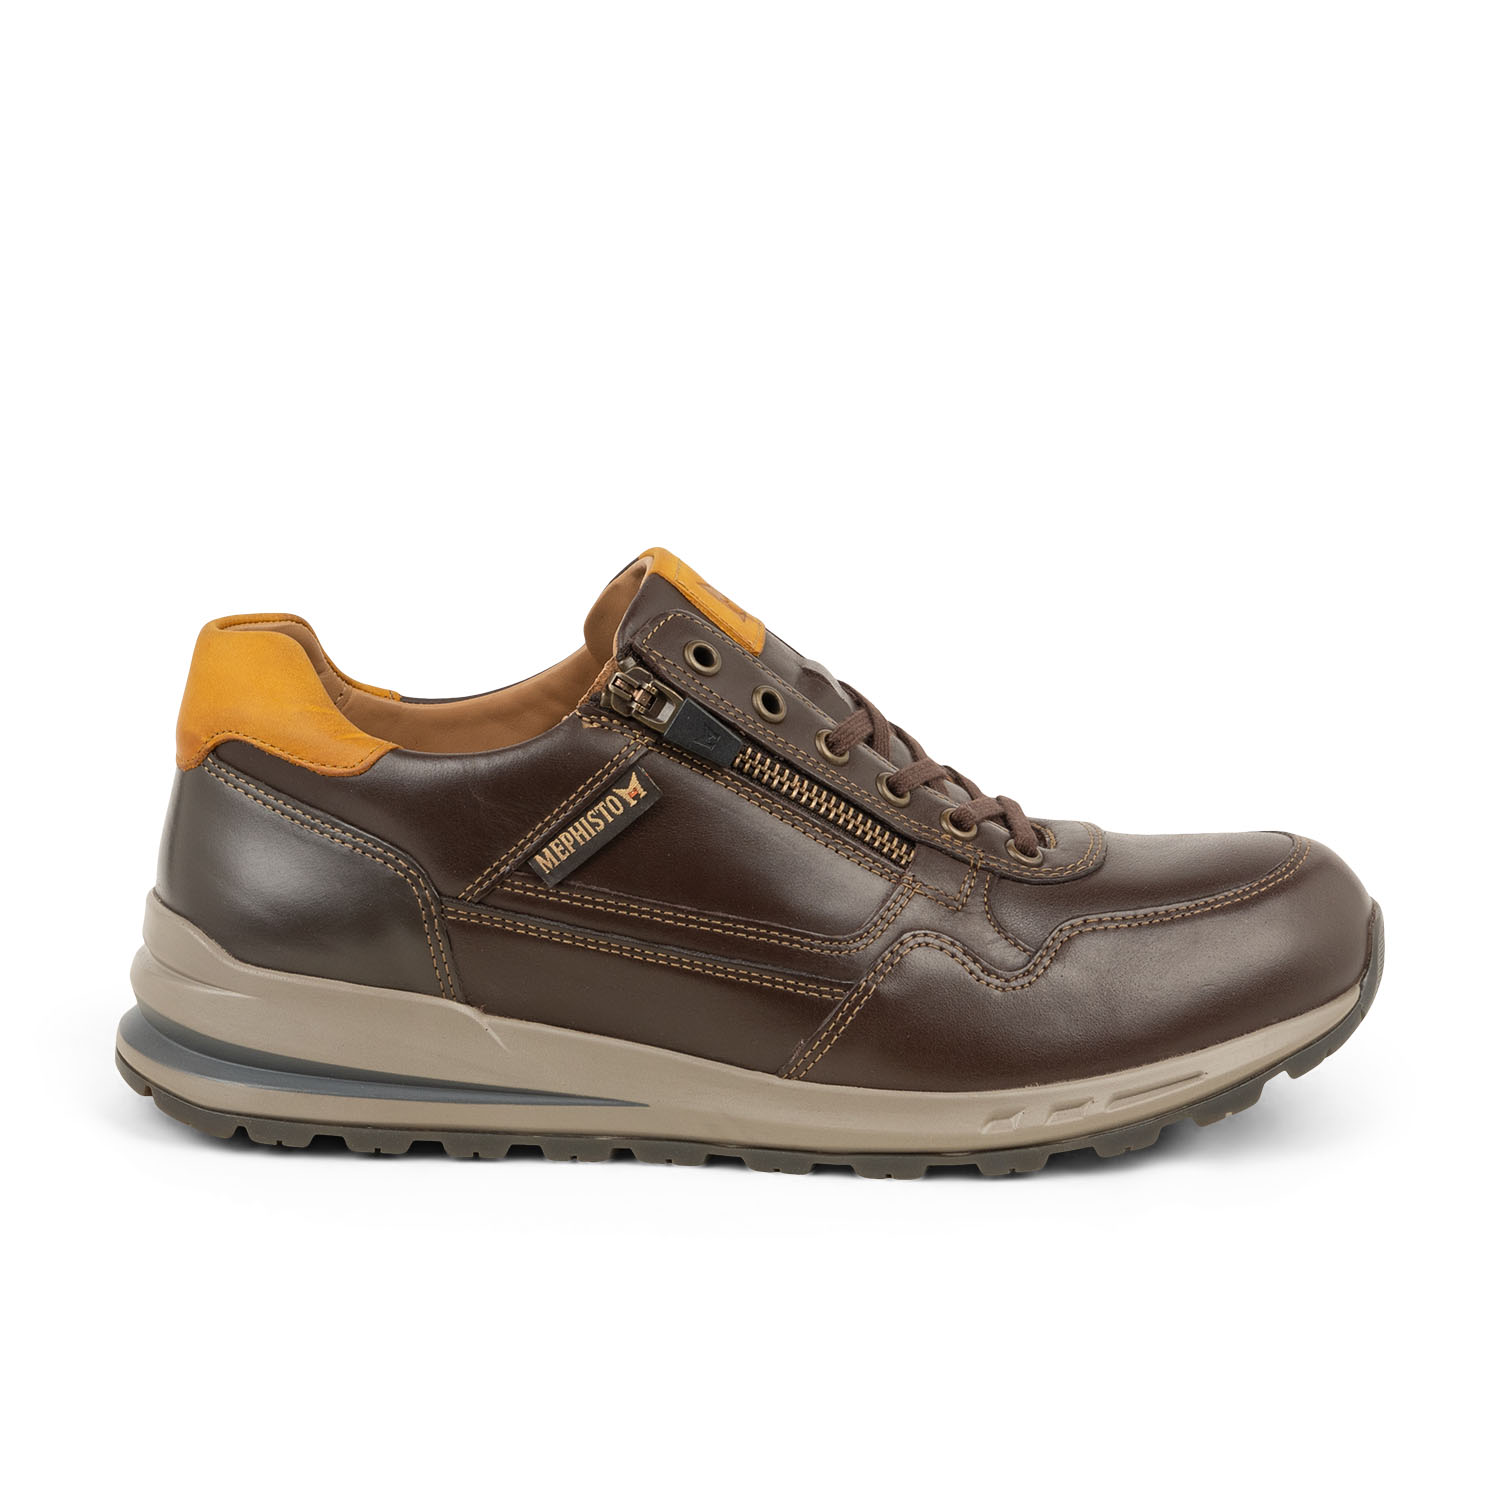 01 - BRADLEY - MEPHISTO - Chaussures à lacets - Cuir